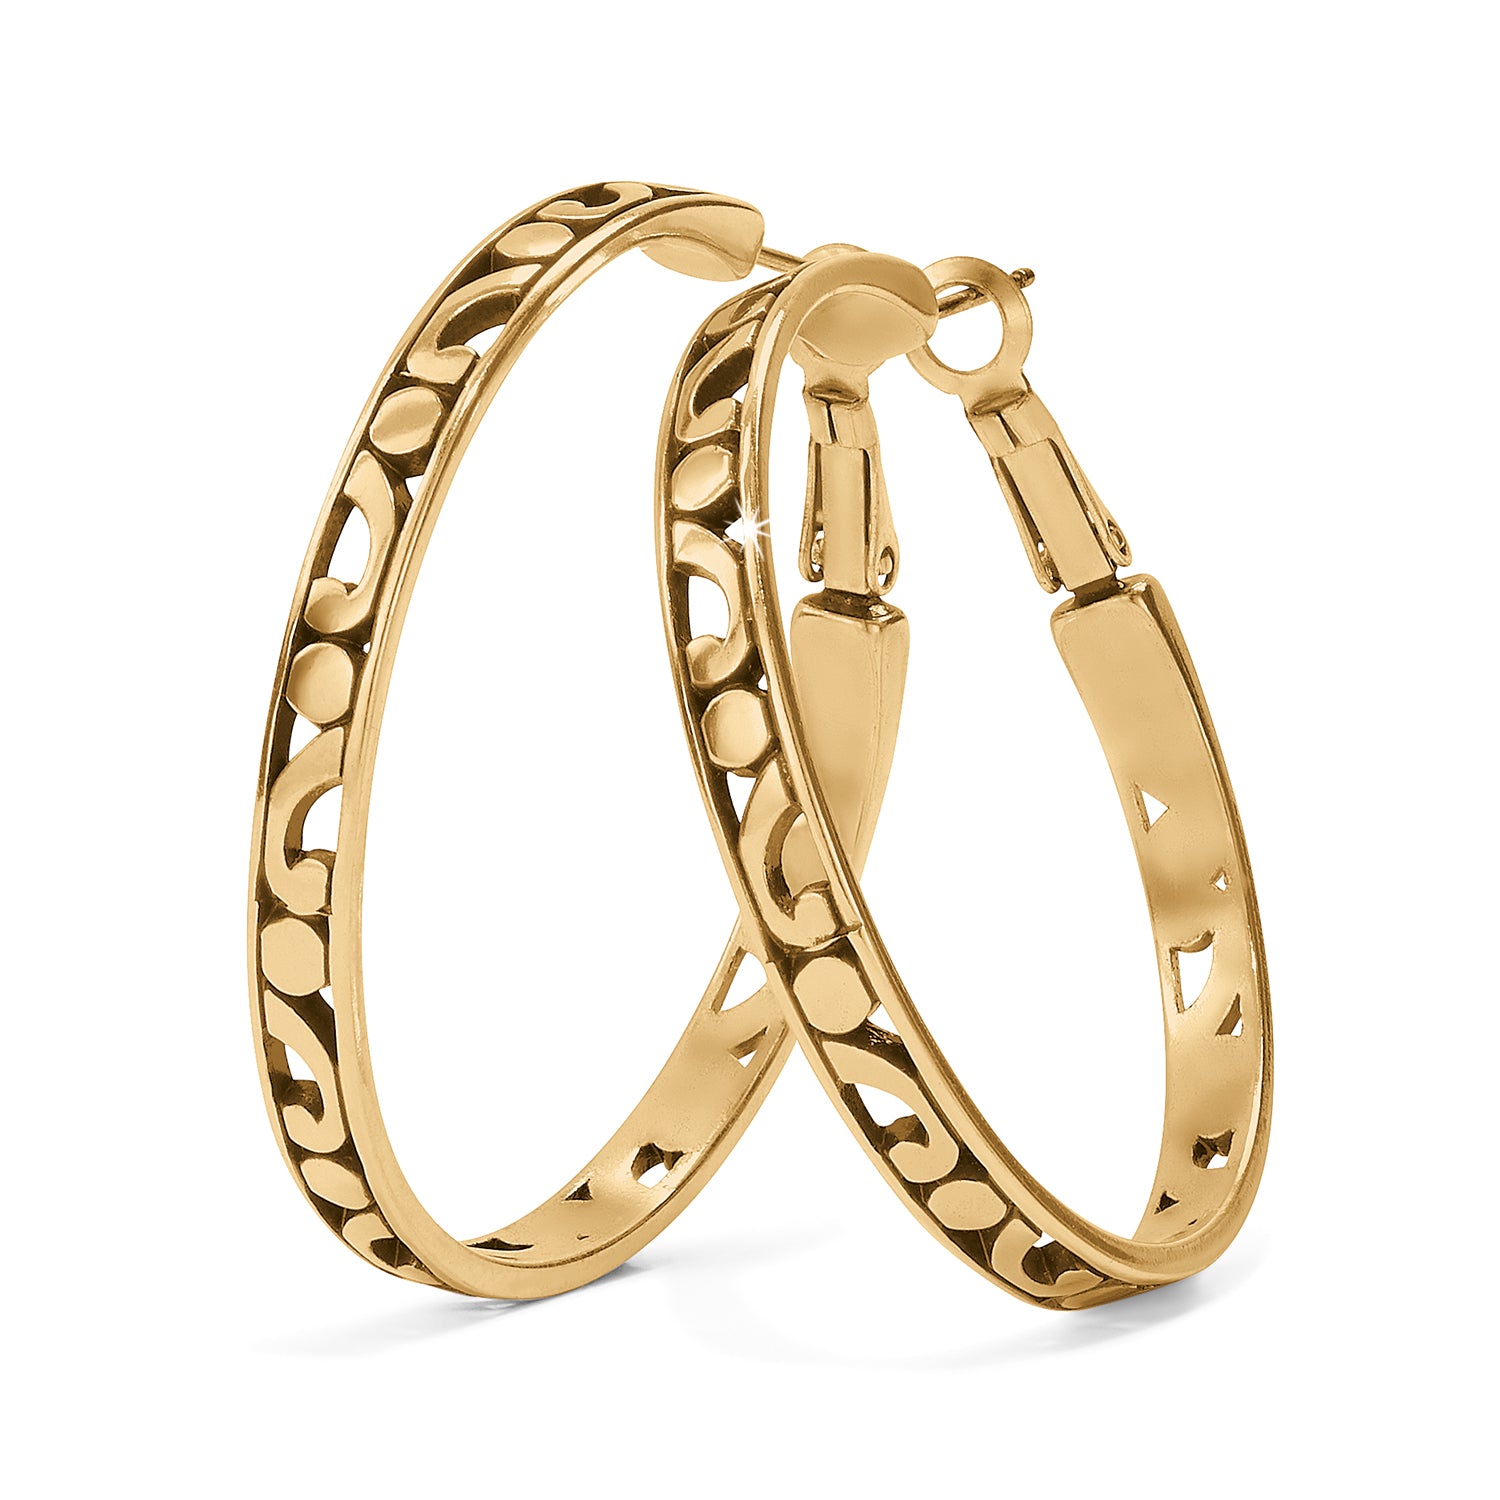 Contempo Large Hoop Earrings